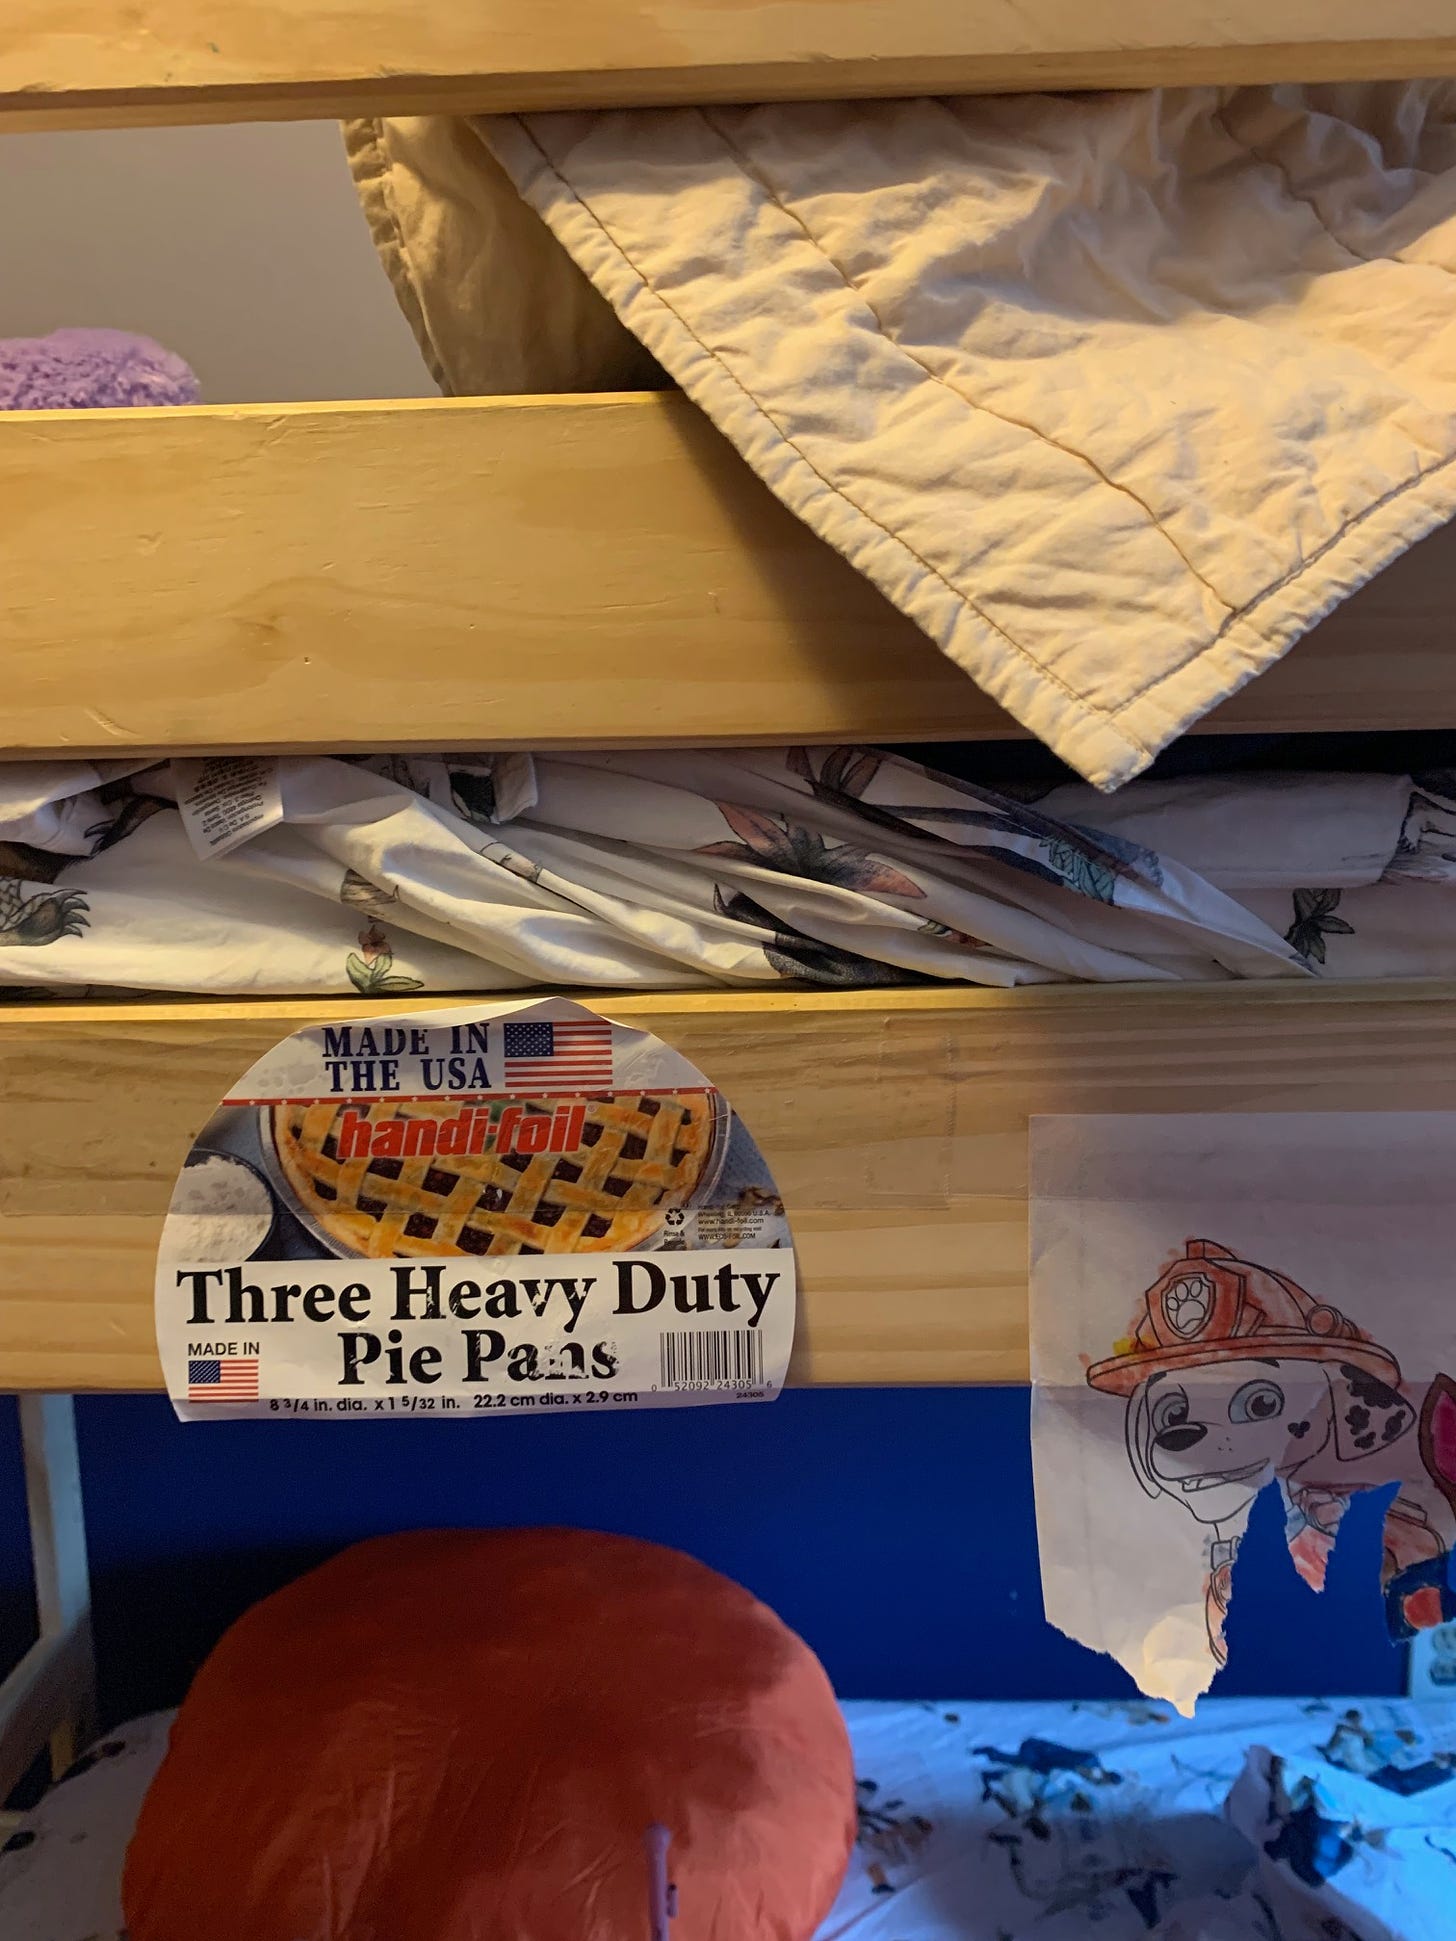 A bunk bed with a "3 heavy duty pie pans" sticker on the rail